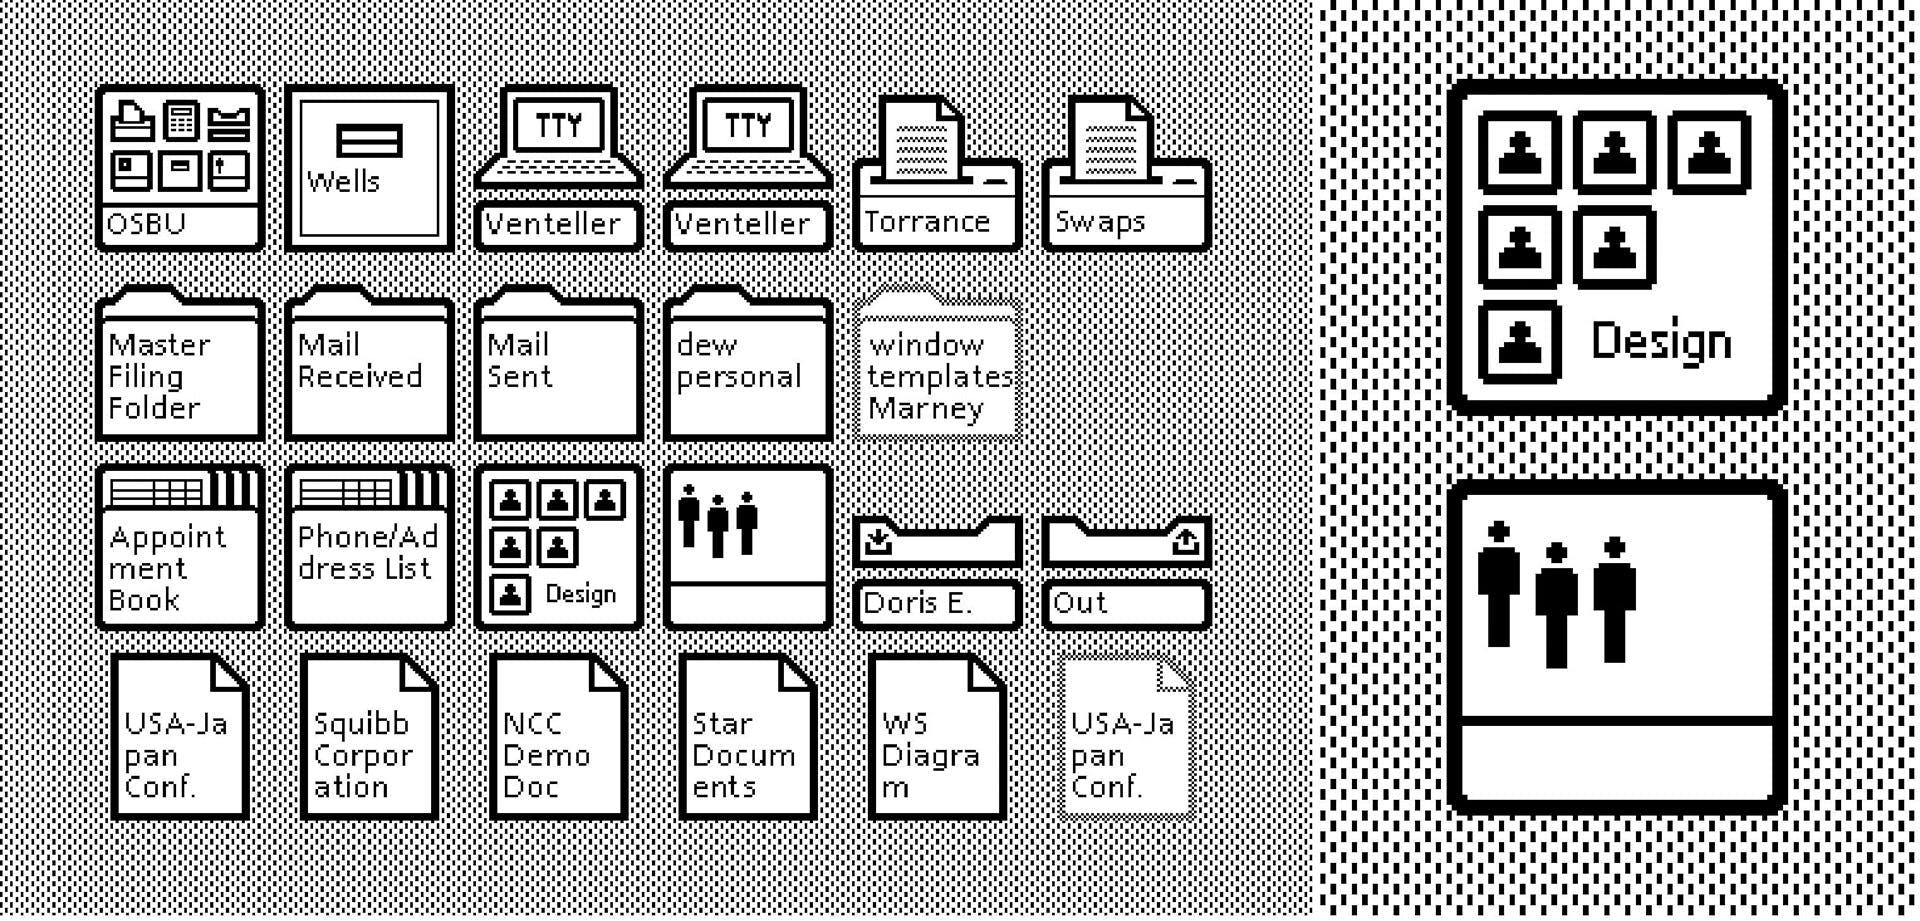 Graphic showing the grey and white user interface of the Xerox Alto, showing icons in the shape of computers and documents